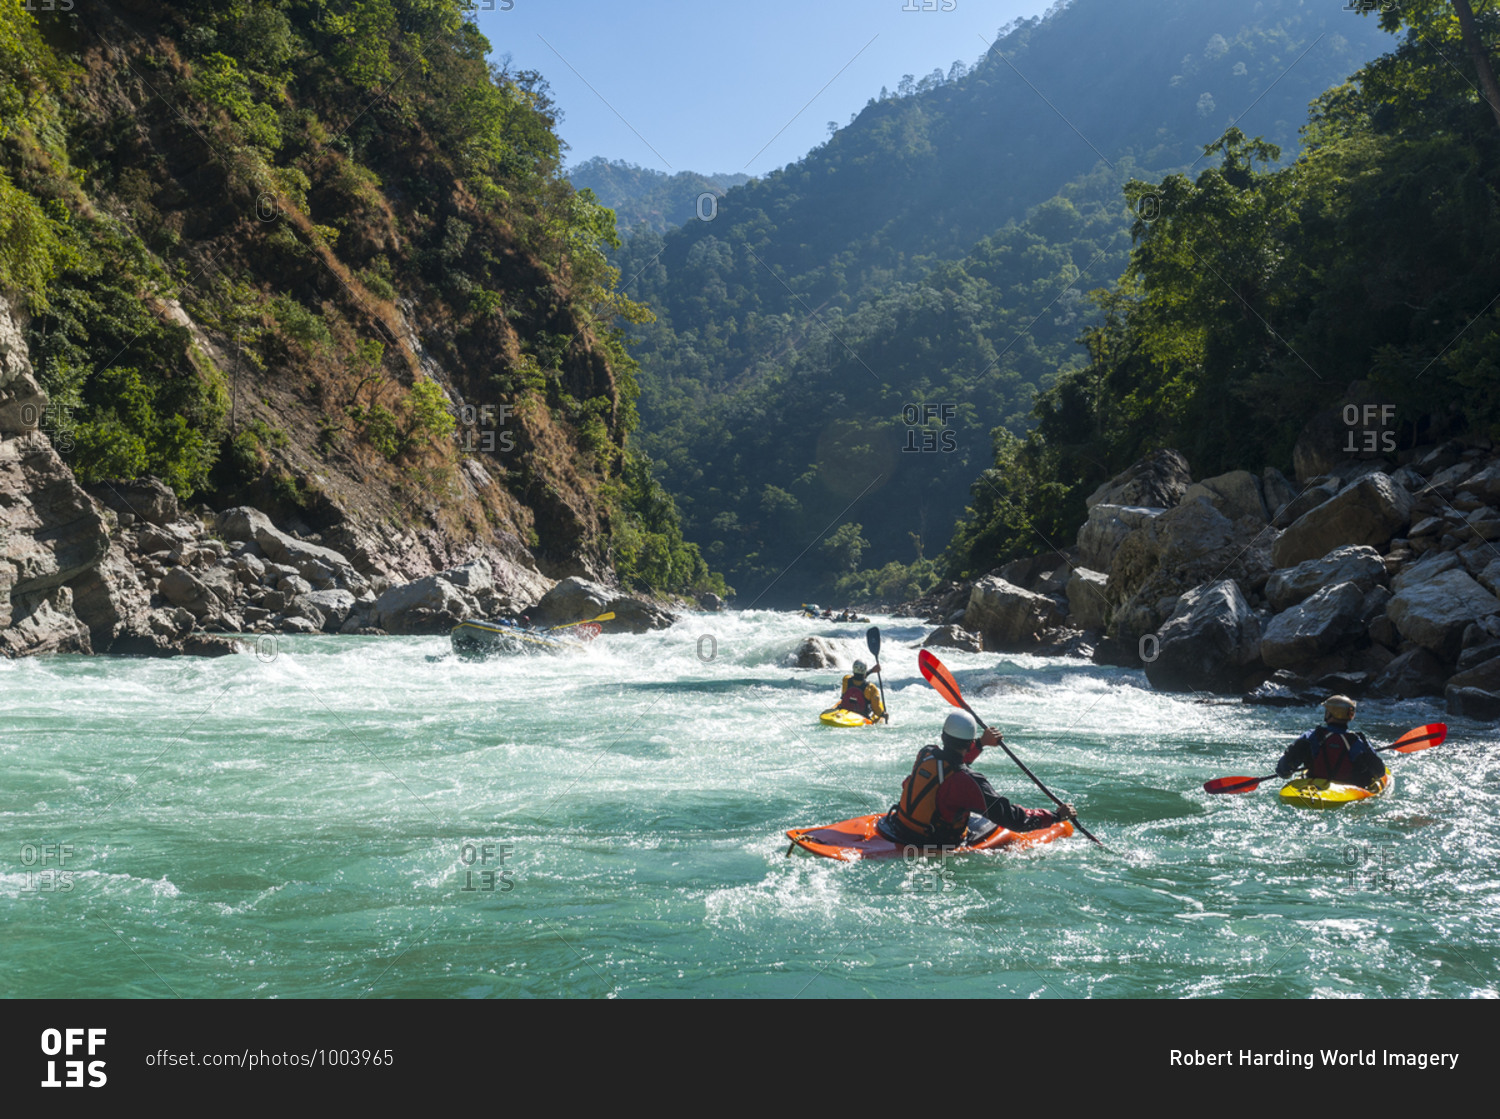 Kayakers negotiate their way through whitewater rapids on the Karnali River in west Nepal, Asia